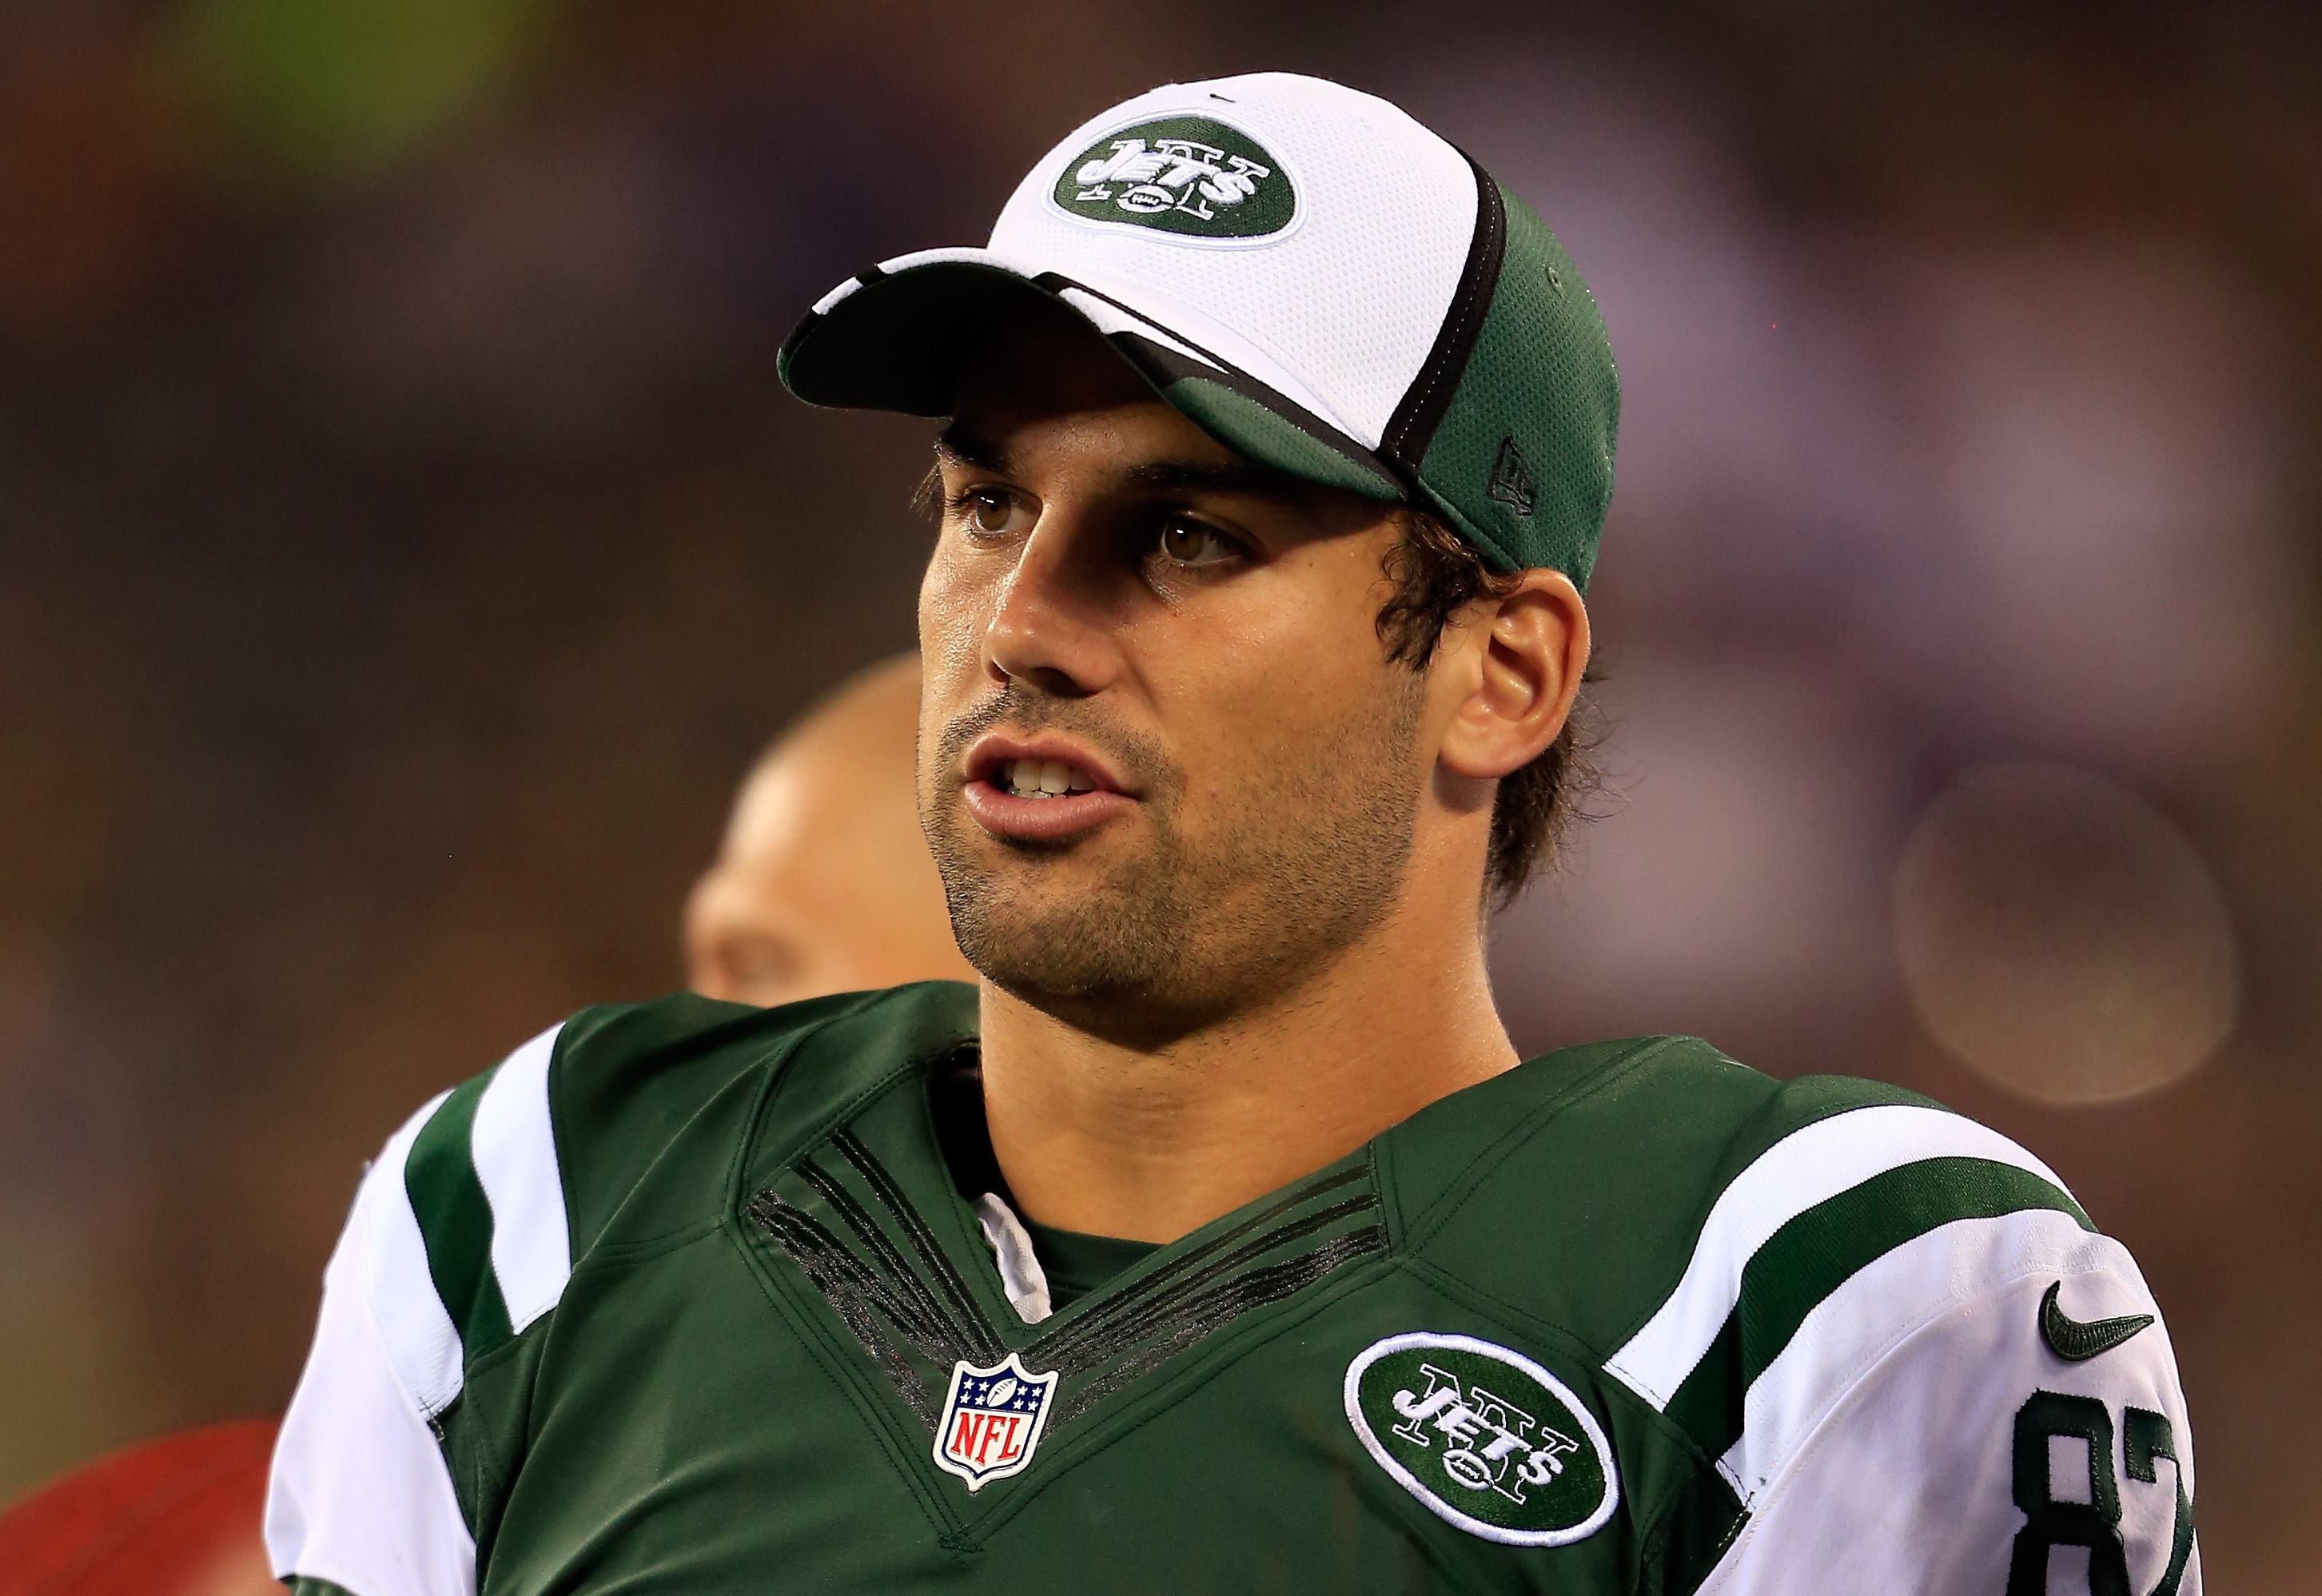 Eric Decker #87 of the New York Jets looks on against the Indianapolis Colts during a preseason game at MetLife Stadium on August 7, 2014 in East Rutherford, New Jersey. (Photo by Alex Trautwig/Getty Images)